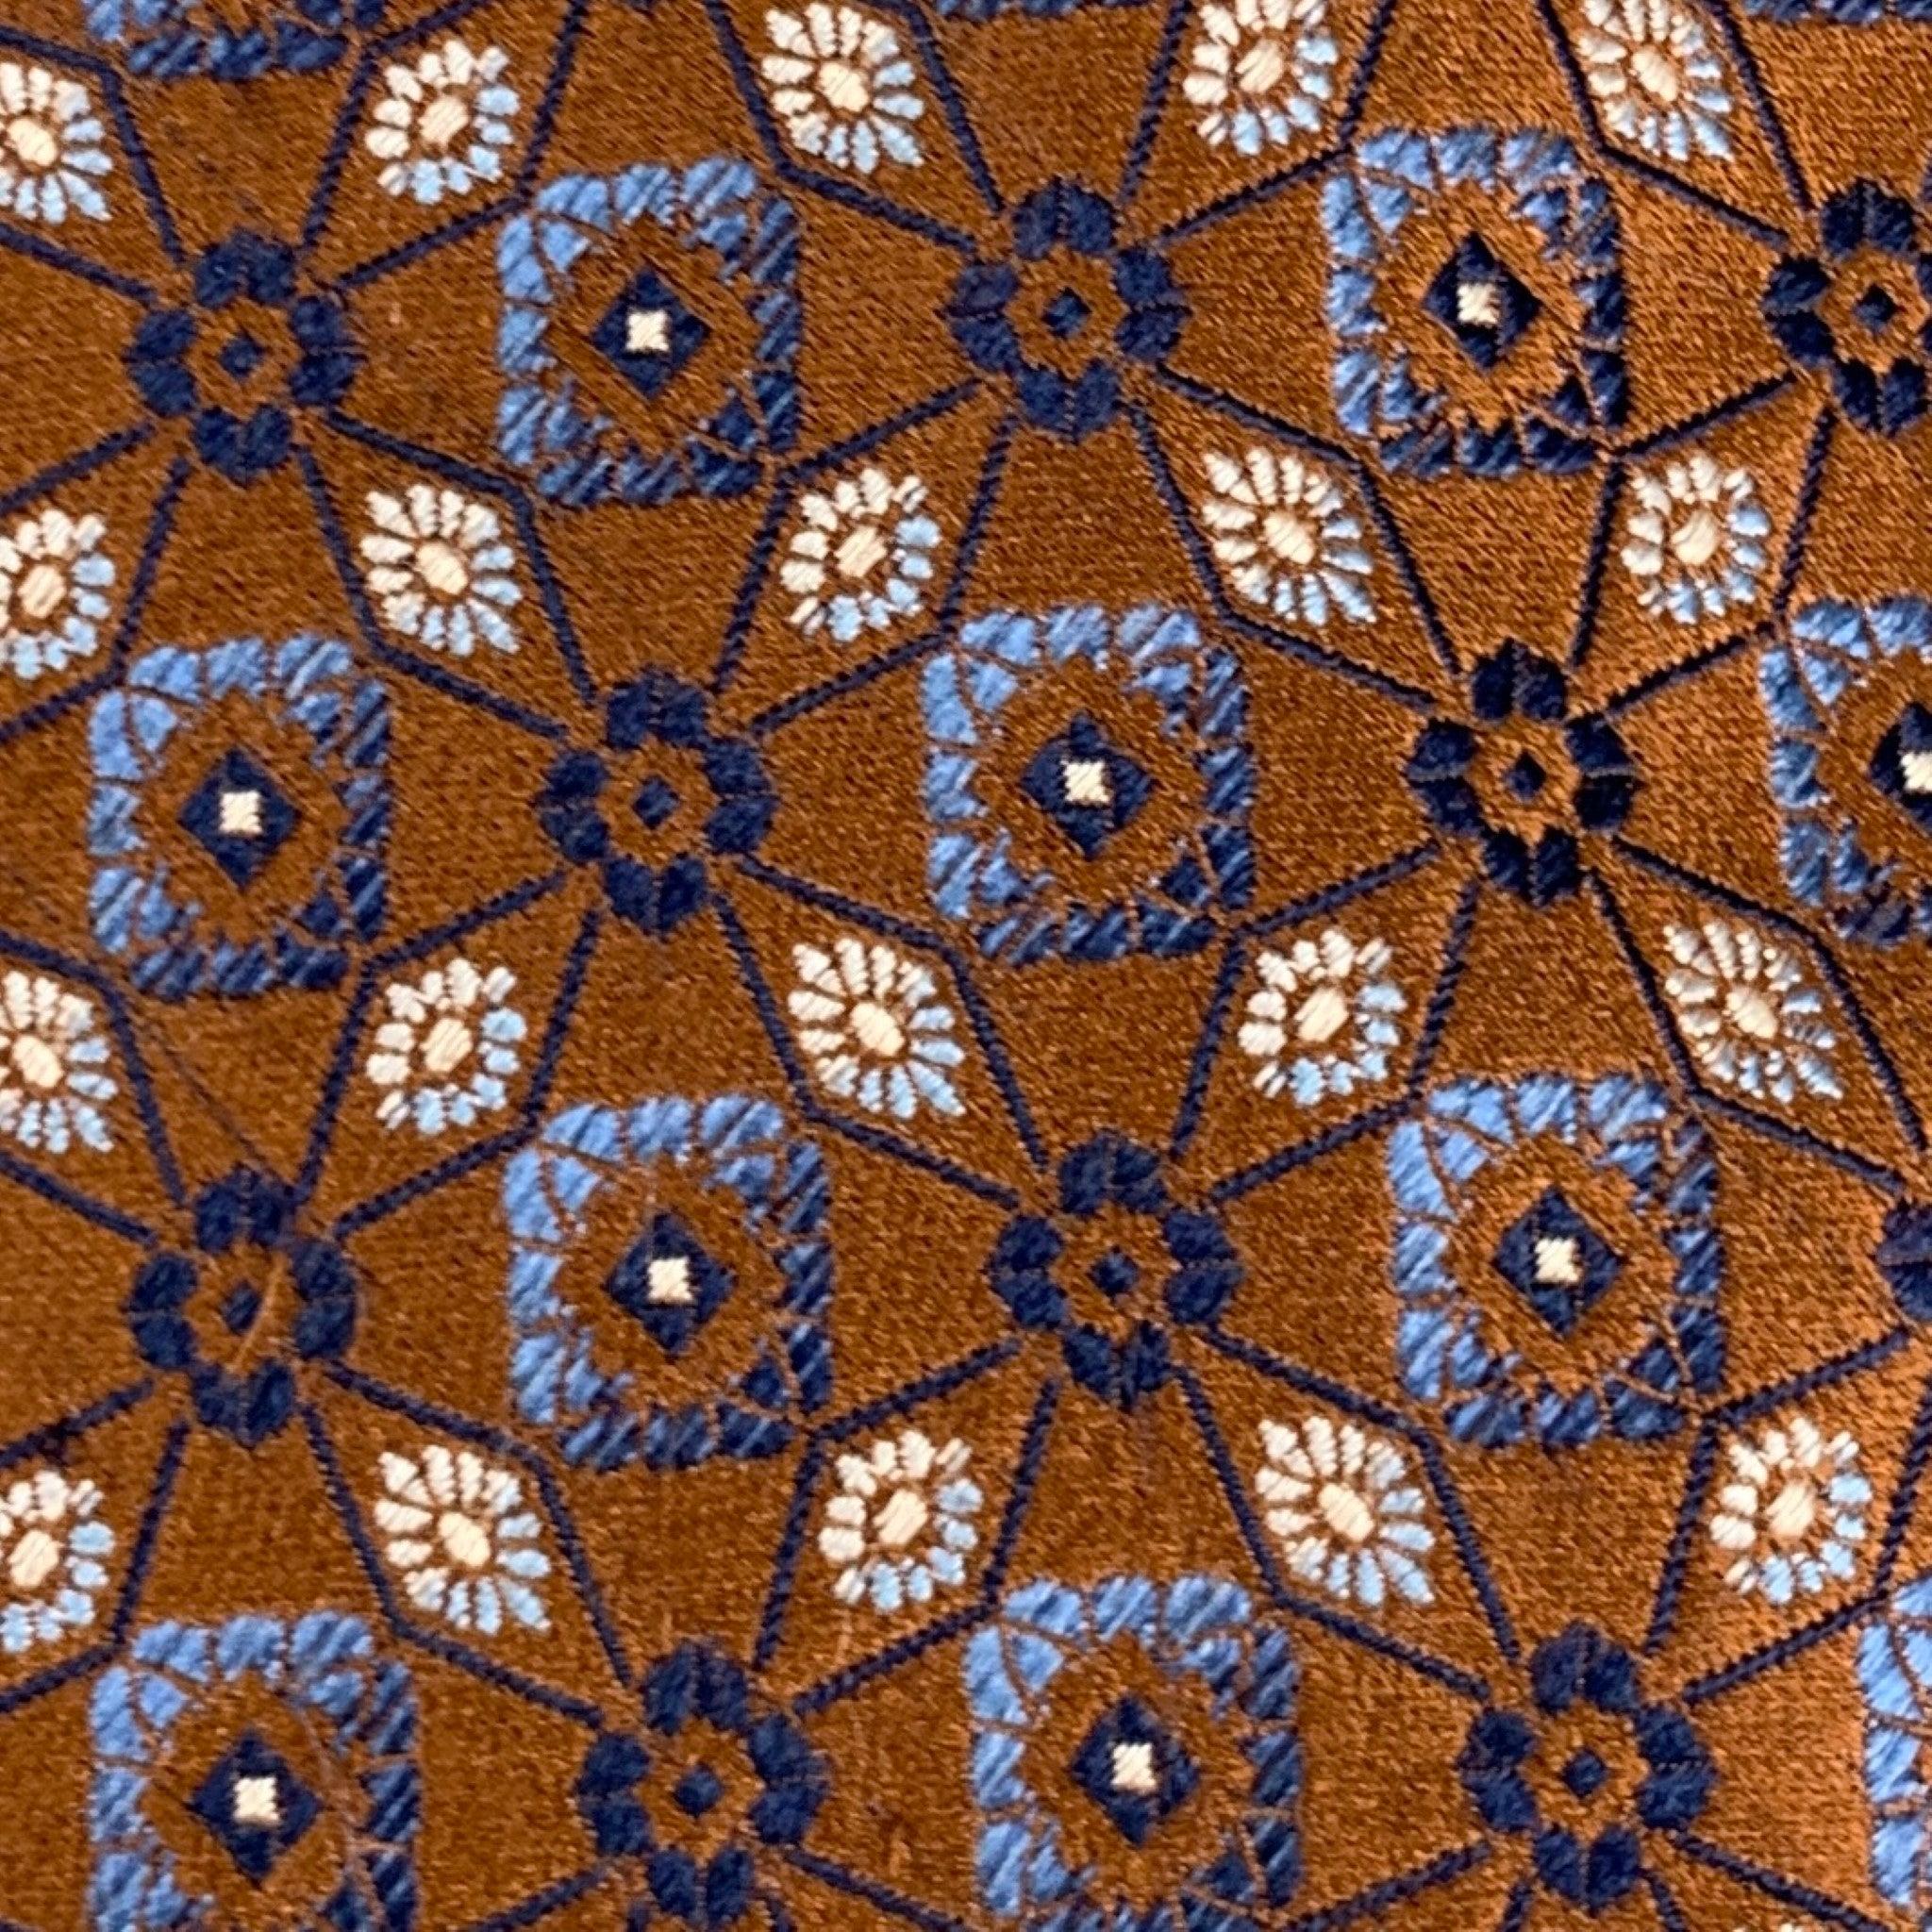 ERMENEGILDO ZEGNA Brown Navy Abstract Floral Silk Jacquard Tie In Excellent Condition For Sale In San Francisco, CA